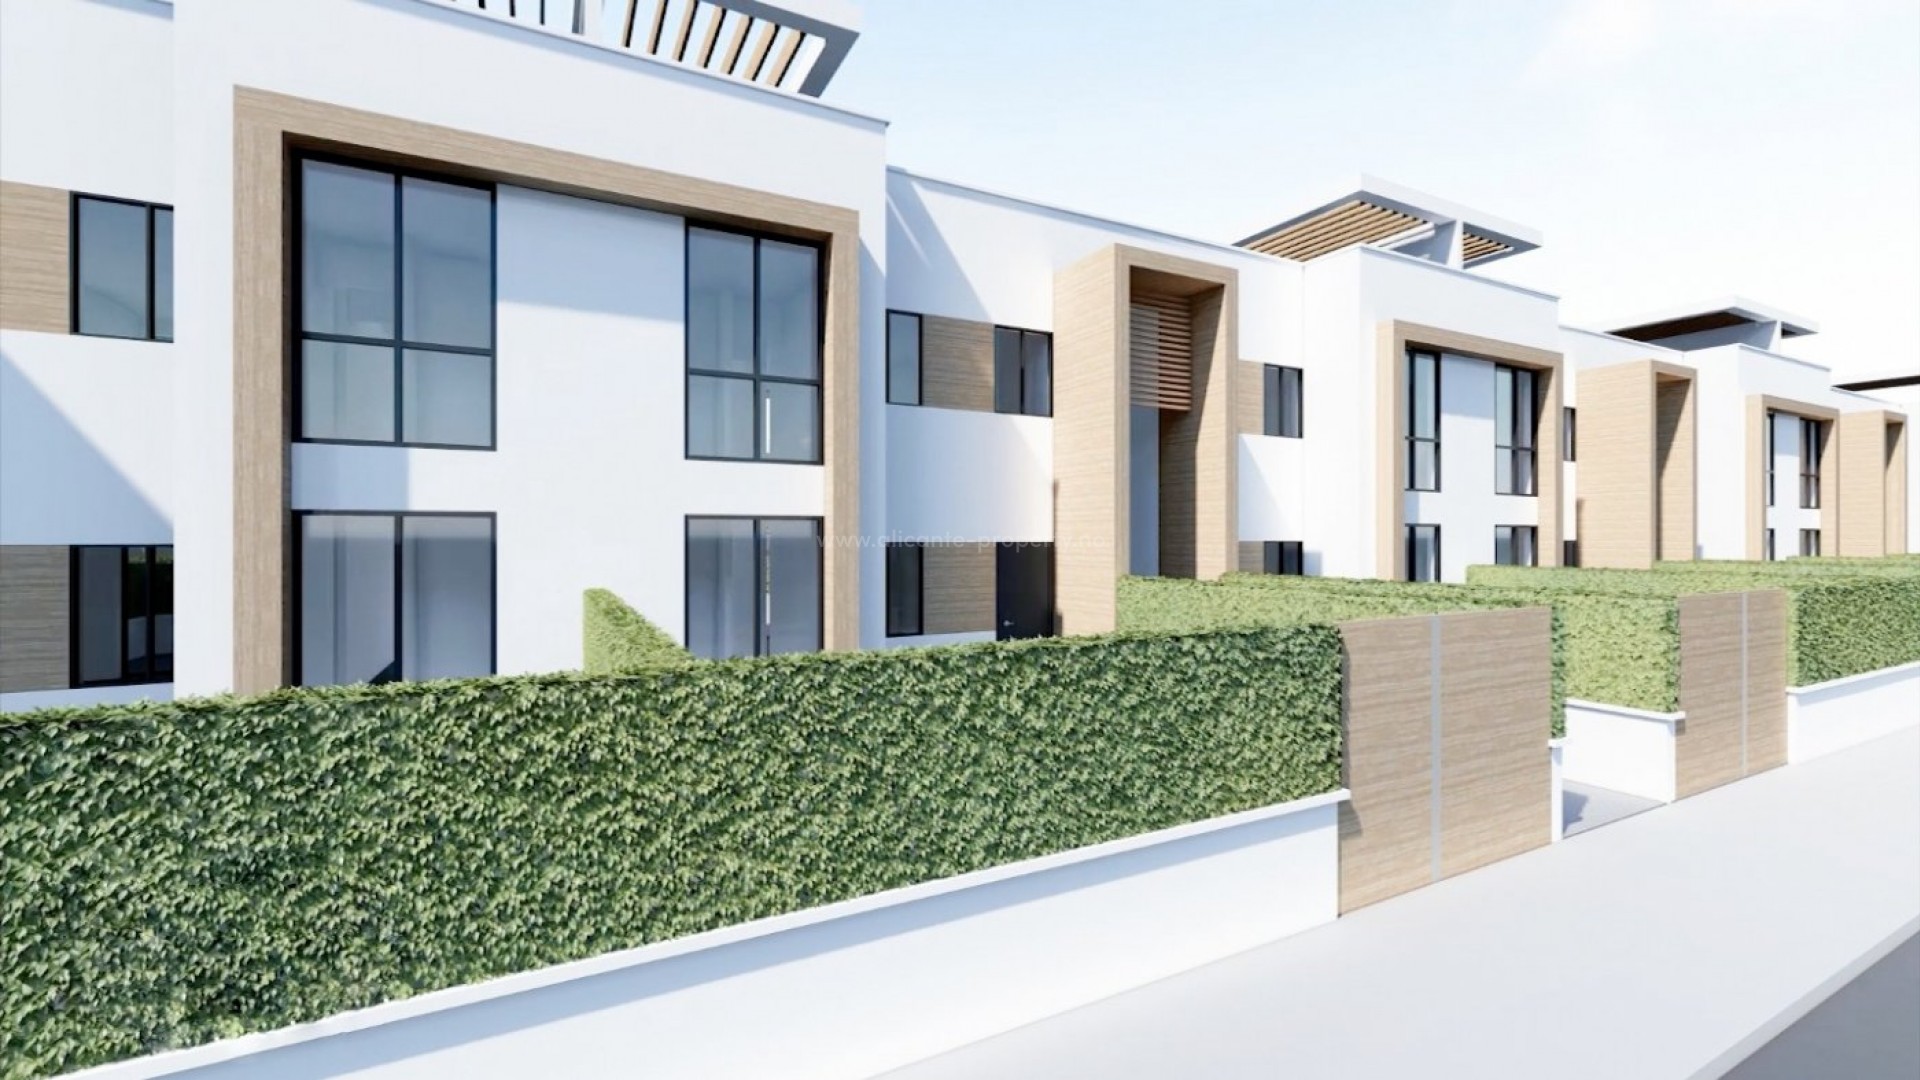 New built bungalows/townhouses in Orihuela Costa, 2 and 3 bedrooms, top floor with private solarium, private garden, shared pool. 5 min from Villamartin golf